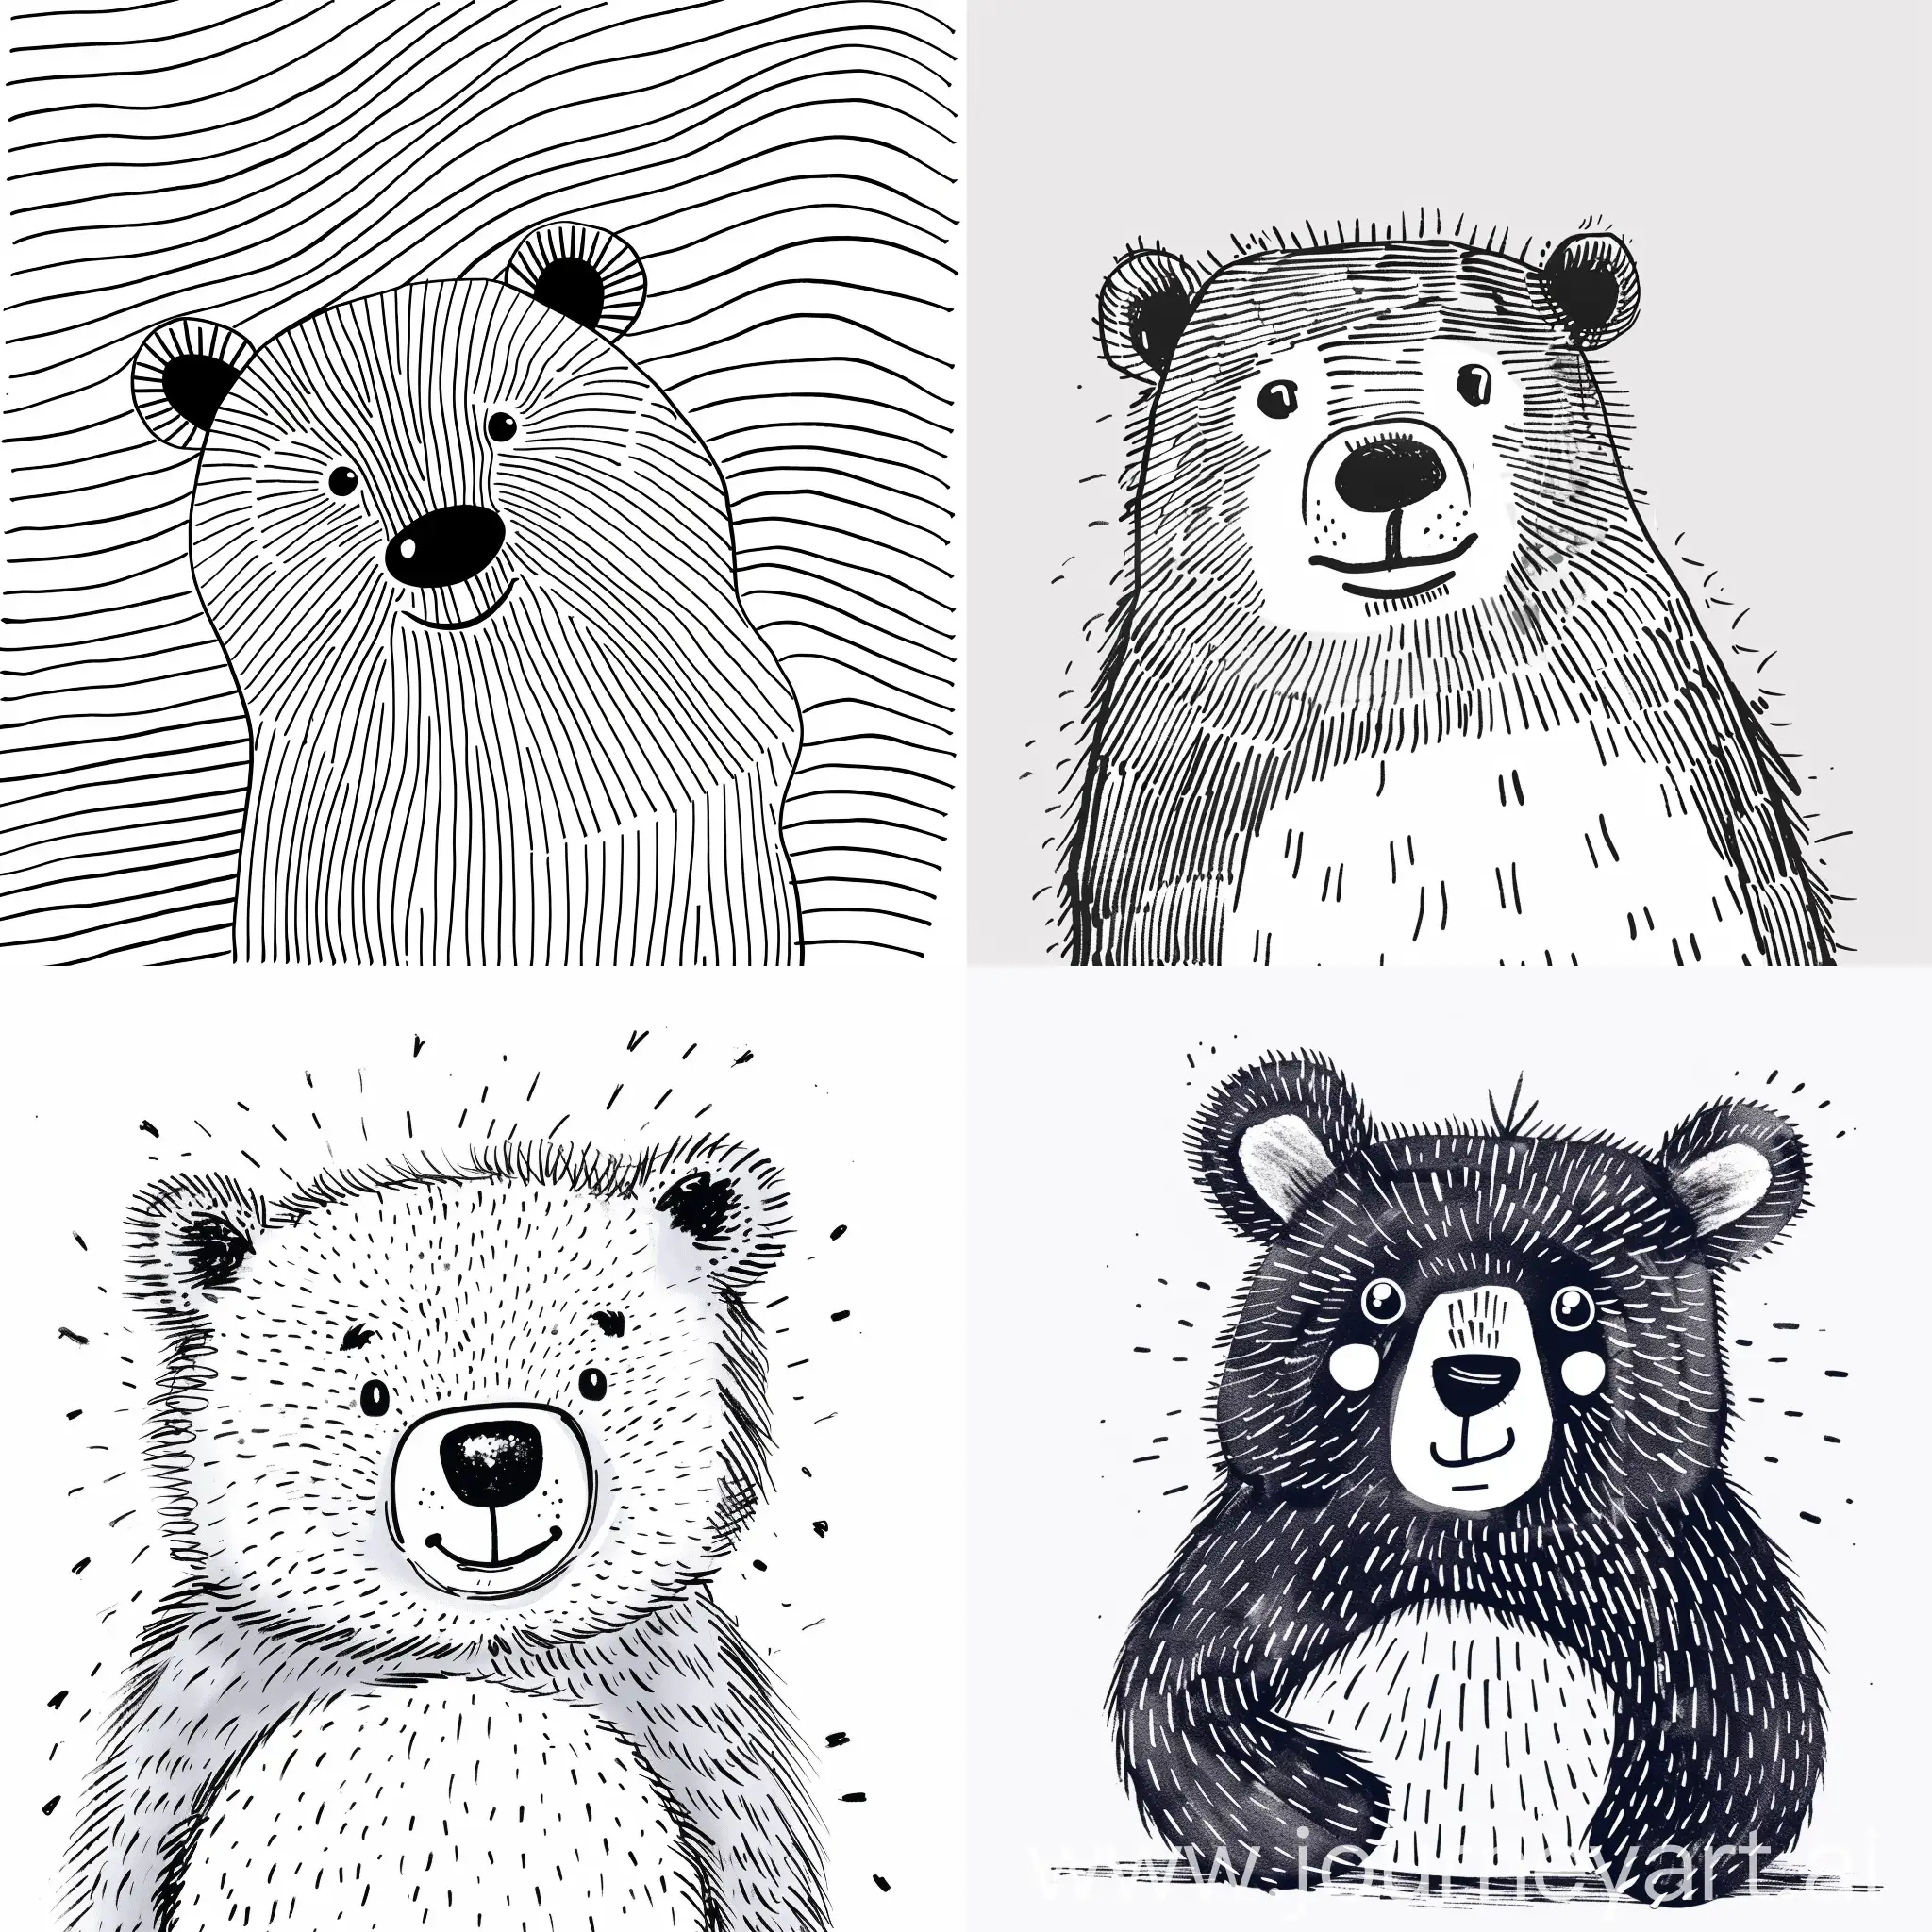 Hi, I need you to create a hand-drawn picture for a clothing brand that will depict a cute bear on a white background with black lines